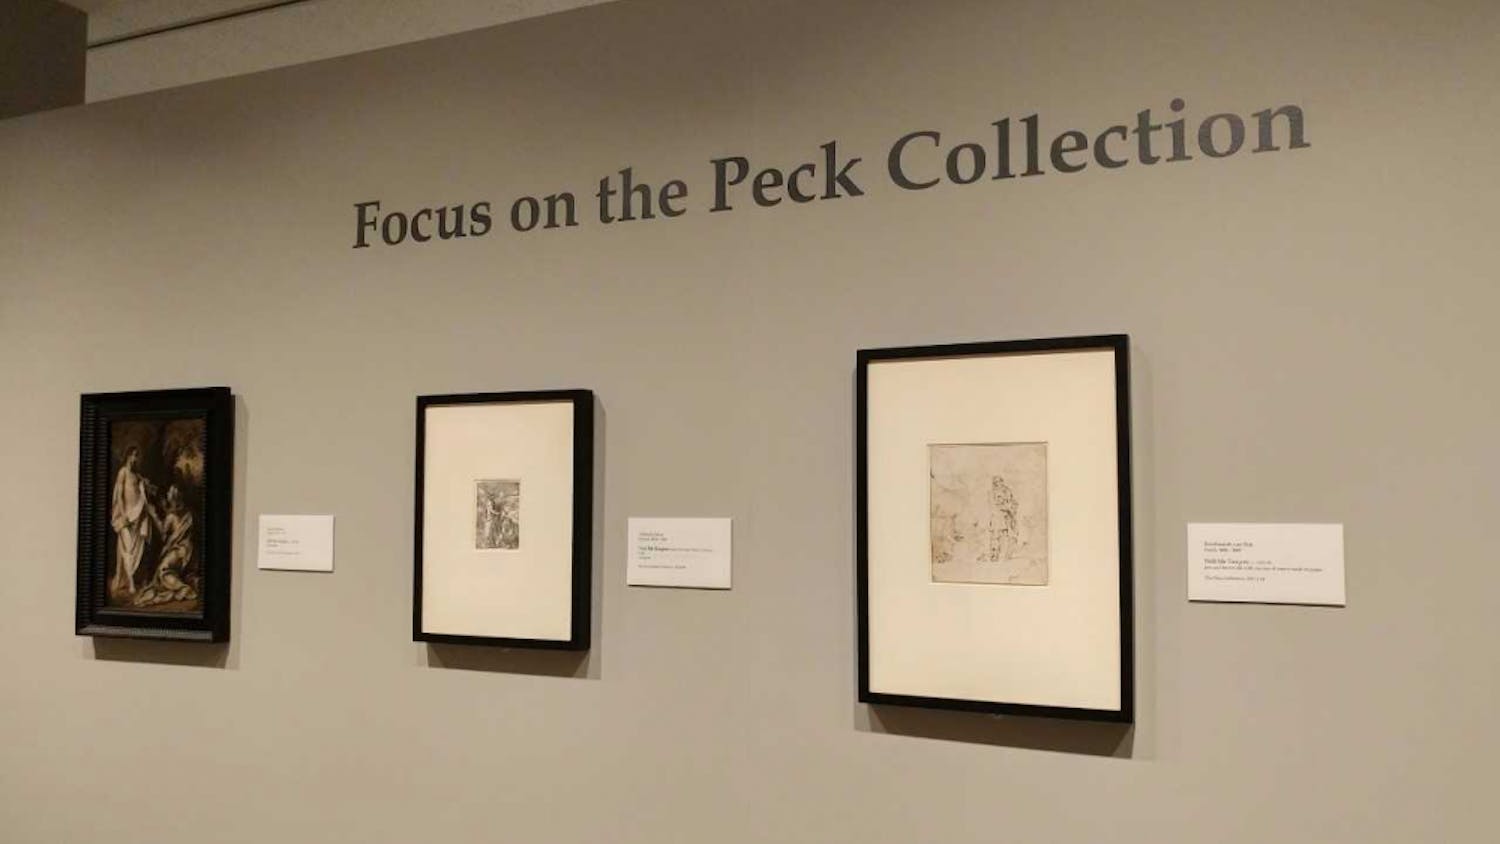 Focus on the Peck Collection